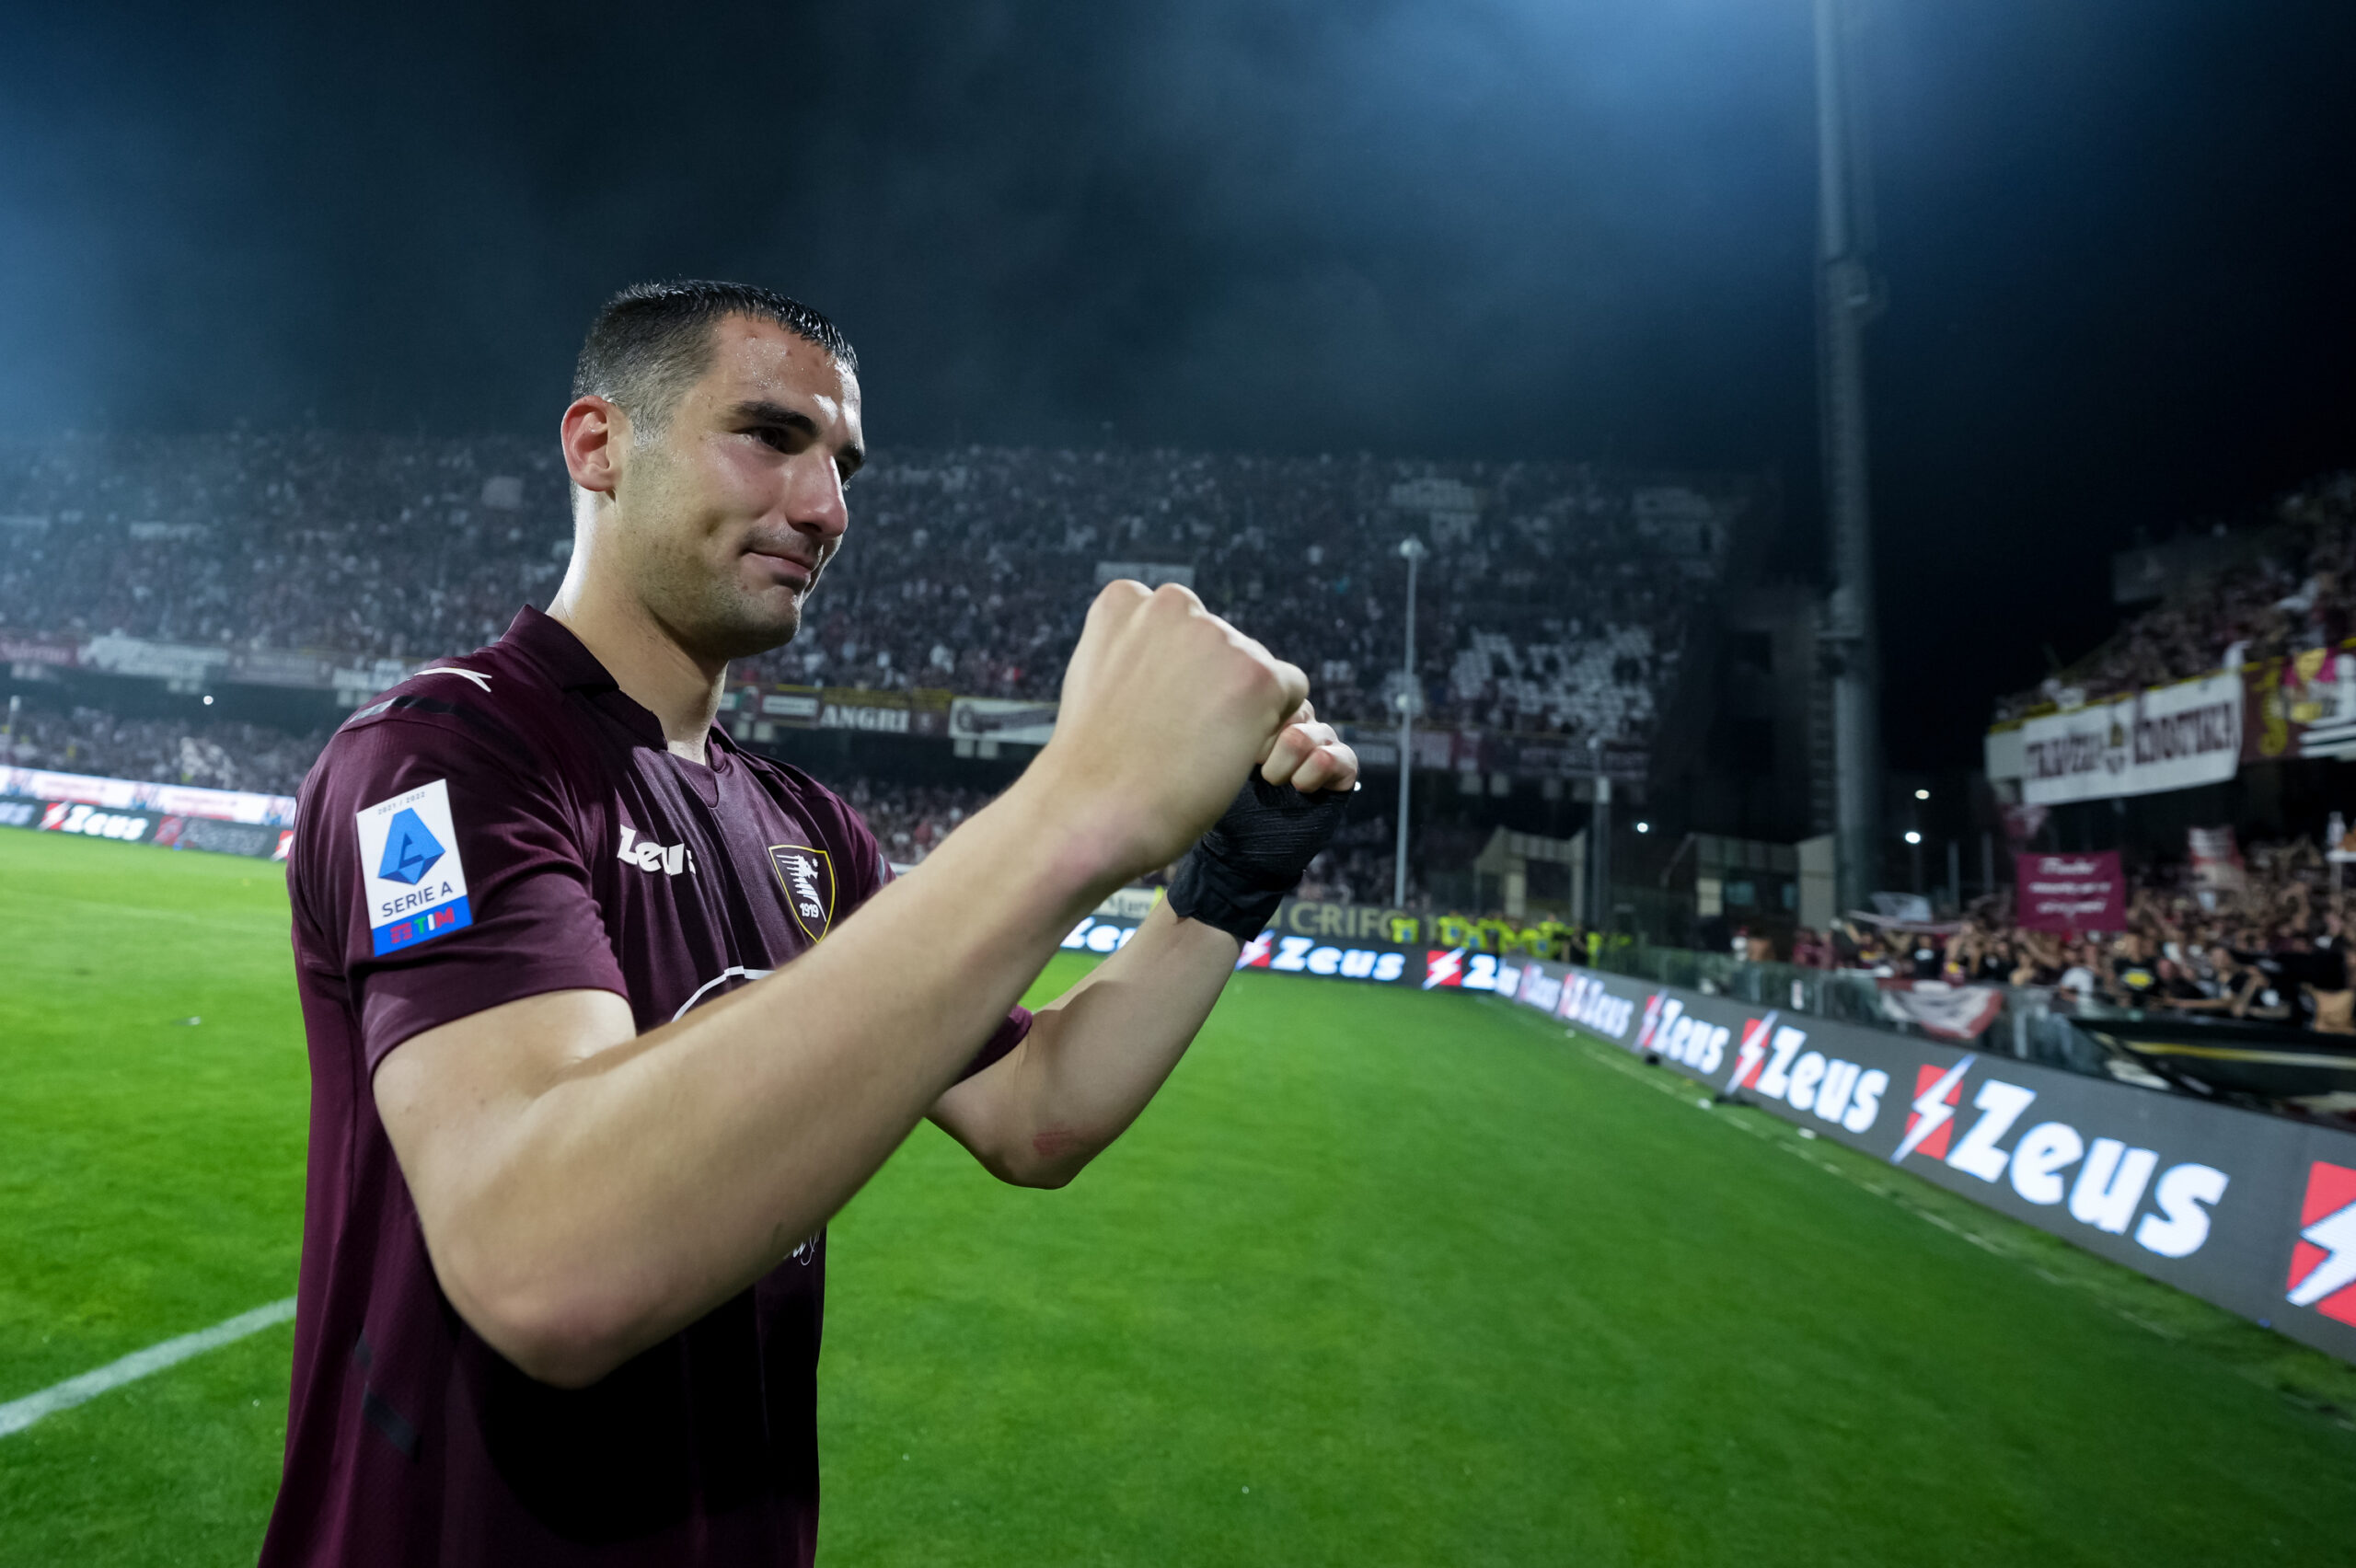 Federico Bonazzoli is eager to join Lazio, which conversely are in the hunt for a deputy striker. The forward isn’t a full-time starter at Salernitana.